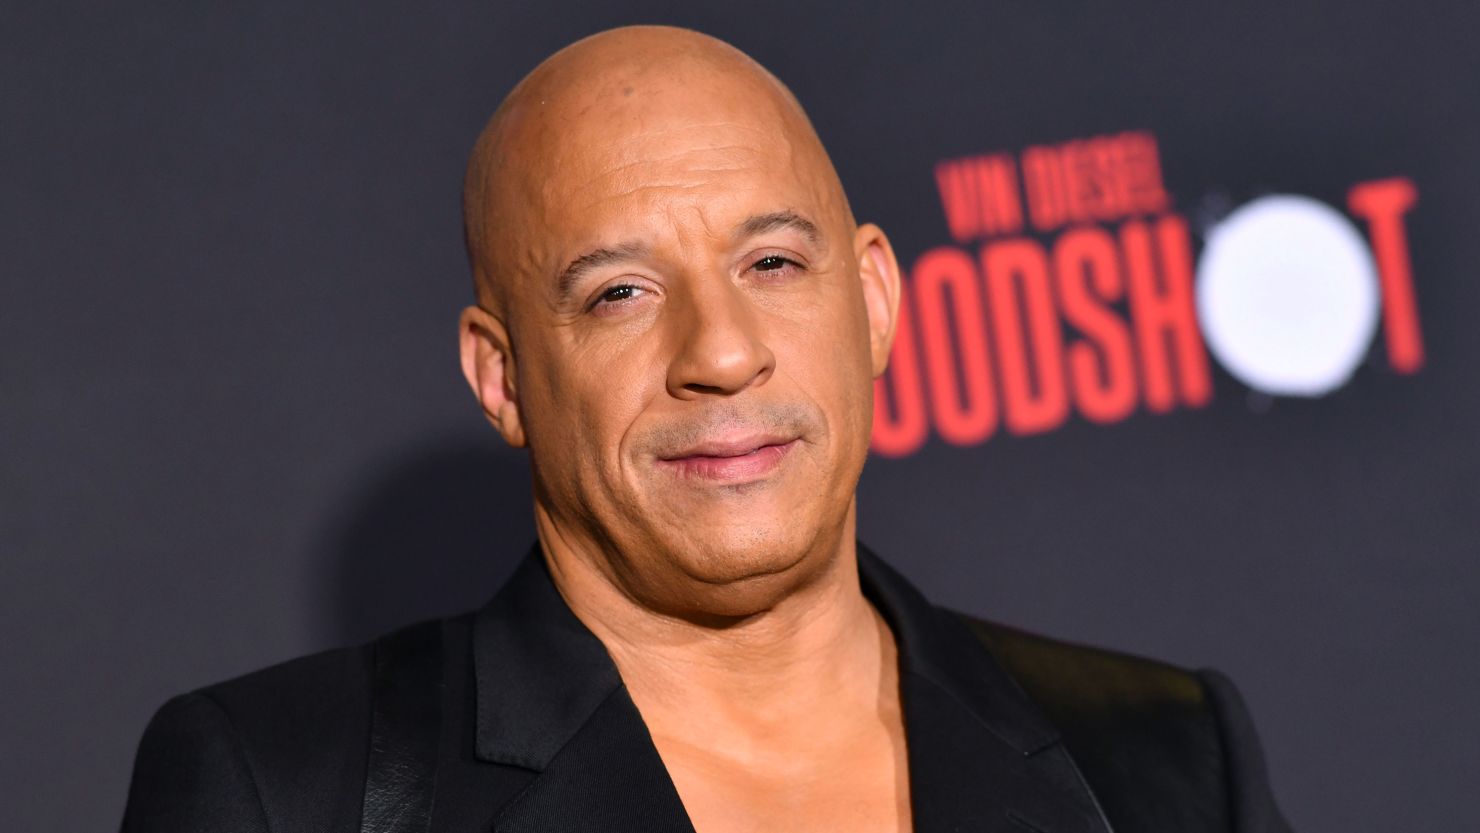 Vin Diesel partners with Kygo to release his first single 'Feel